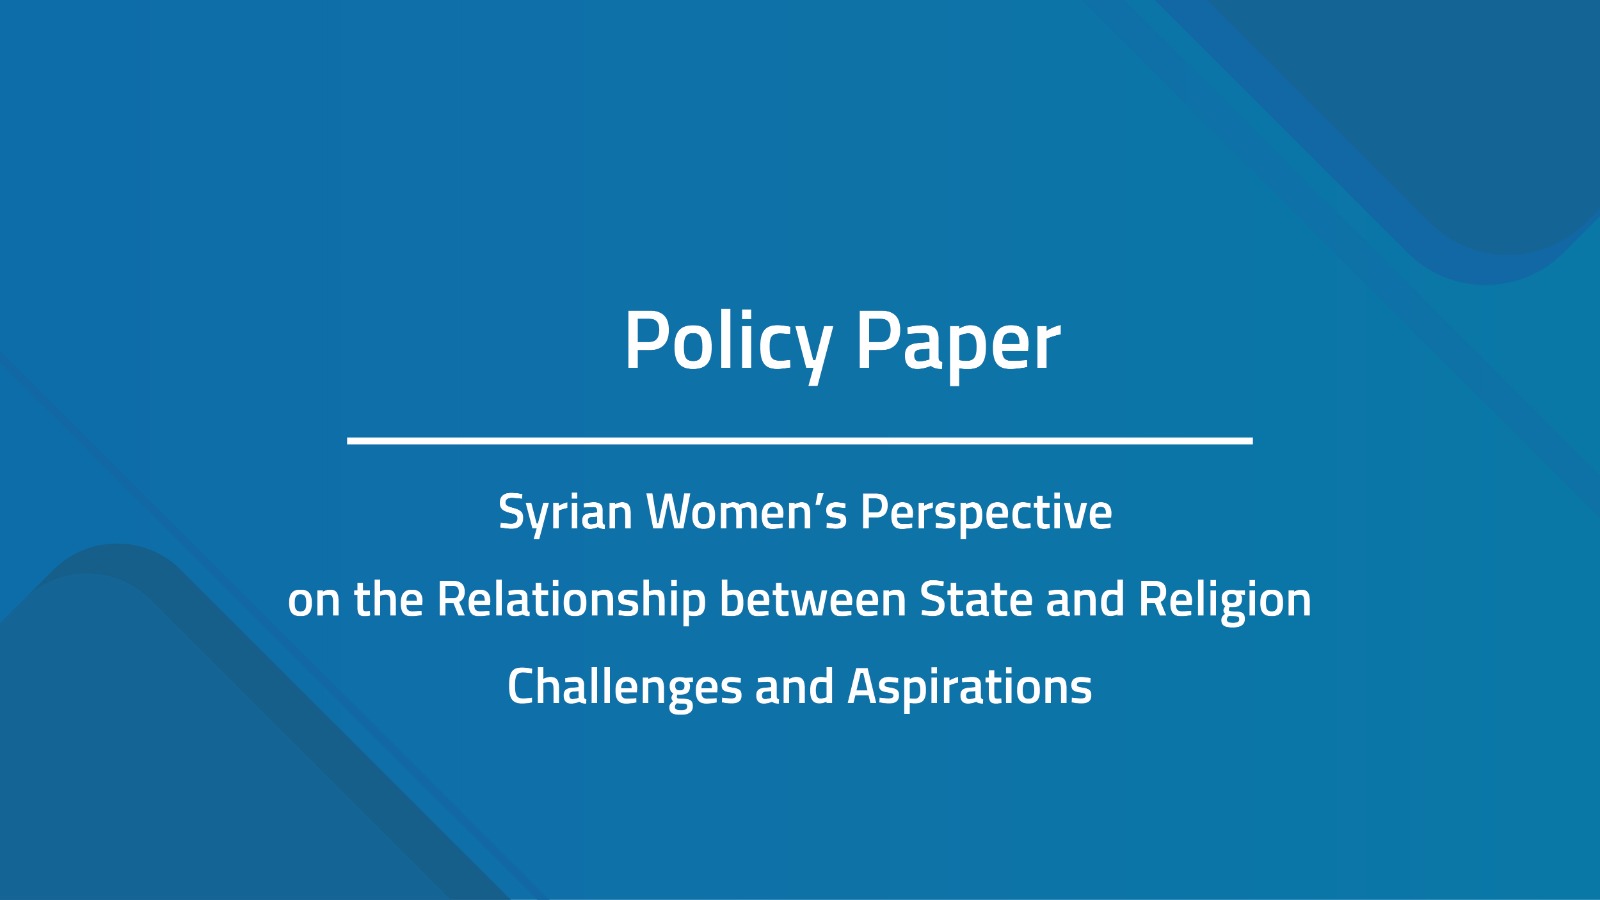 Policy Paper – Syrian Women’s Perspective on the Relationship between State and Religion: Challenges and Aspirations